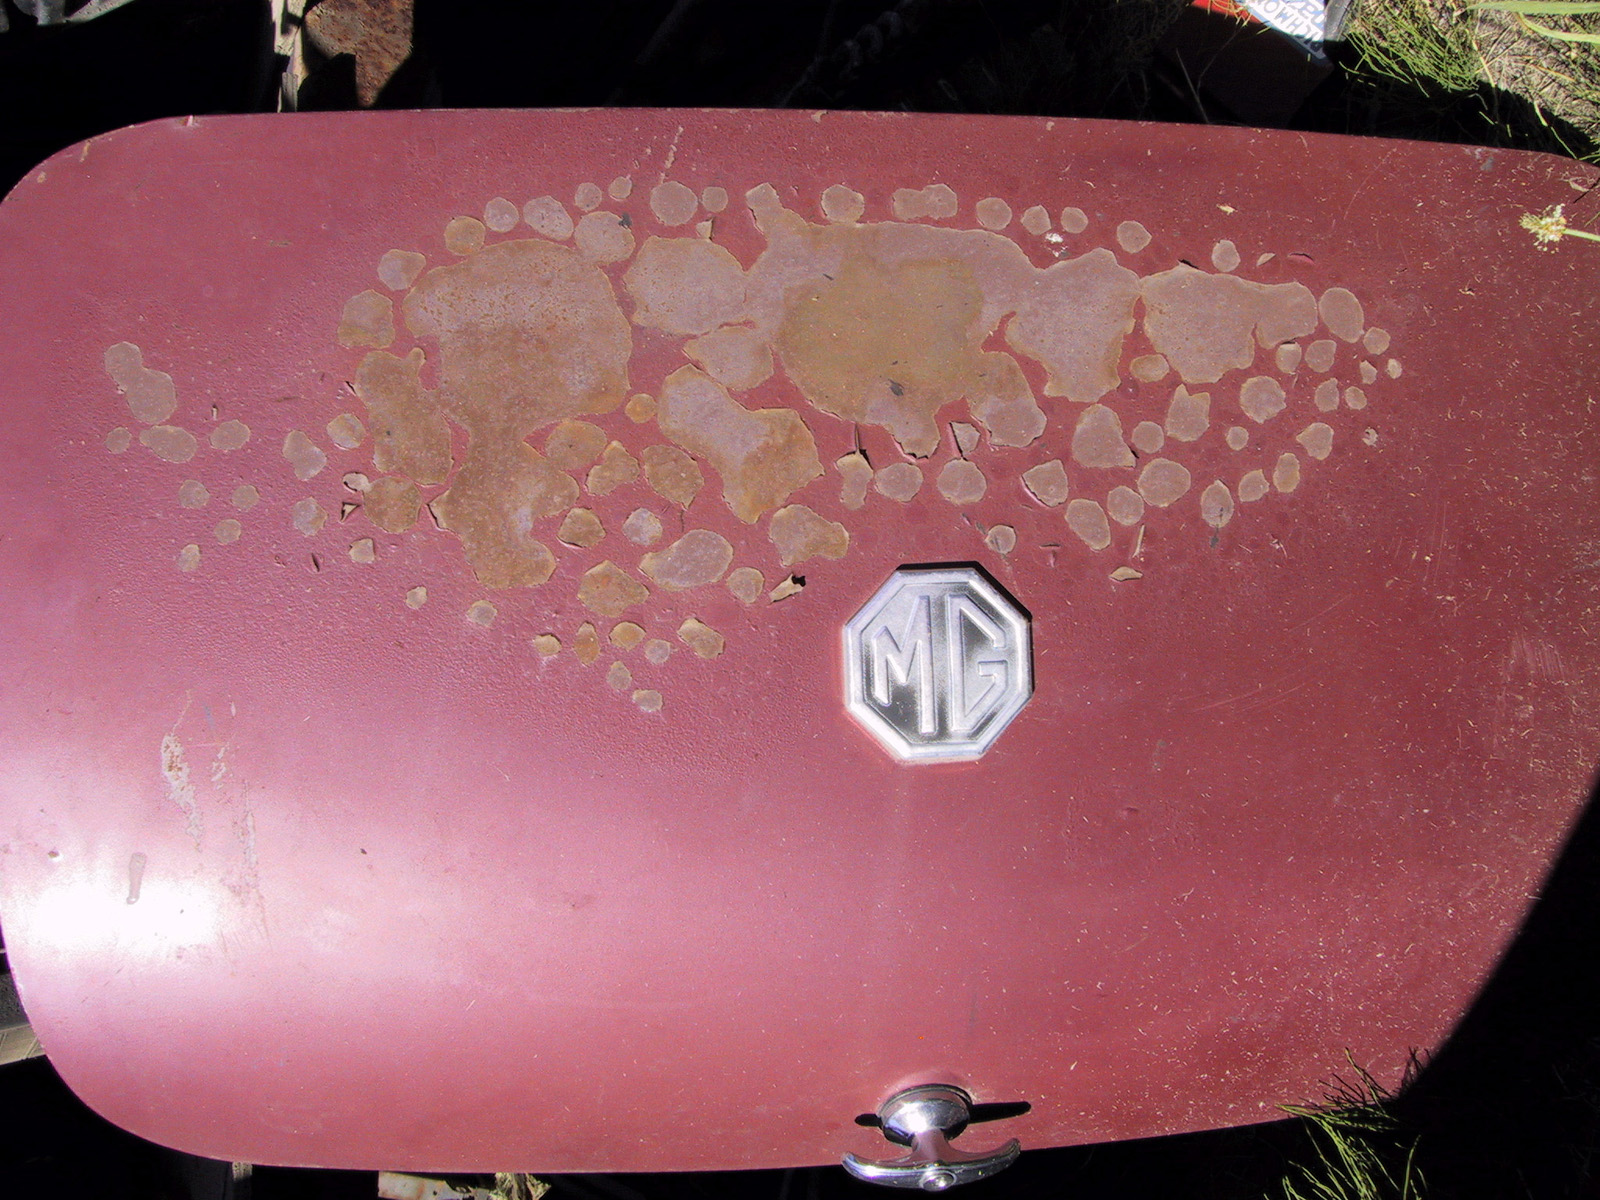 galenslater textures metals logo mg paint painted metal red blister blistered rust rusted hood bonnet hires